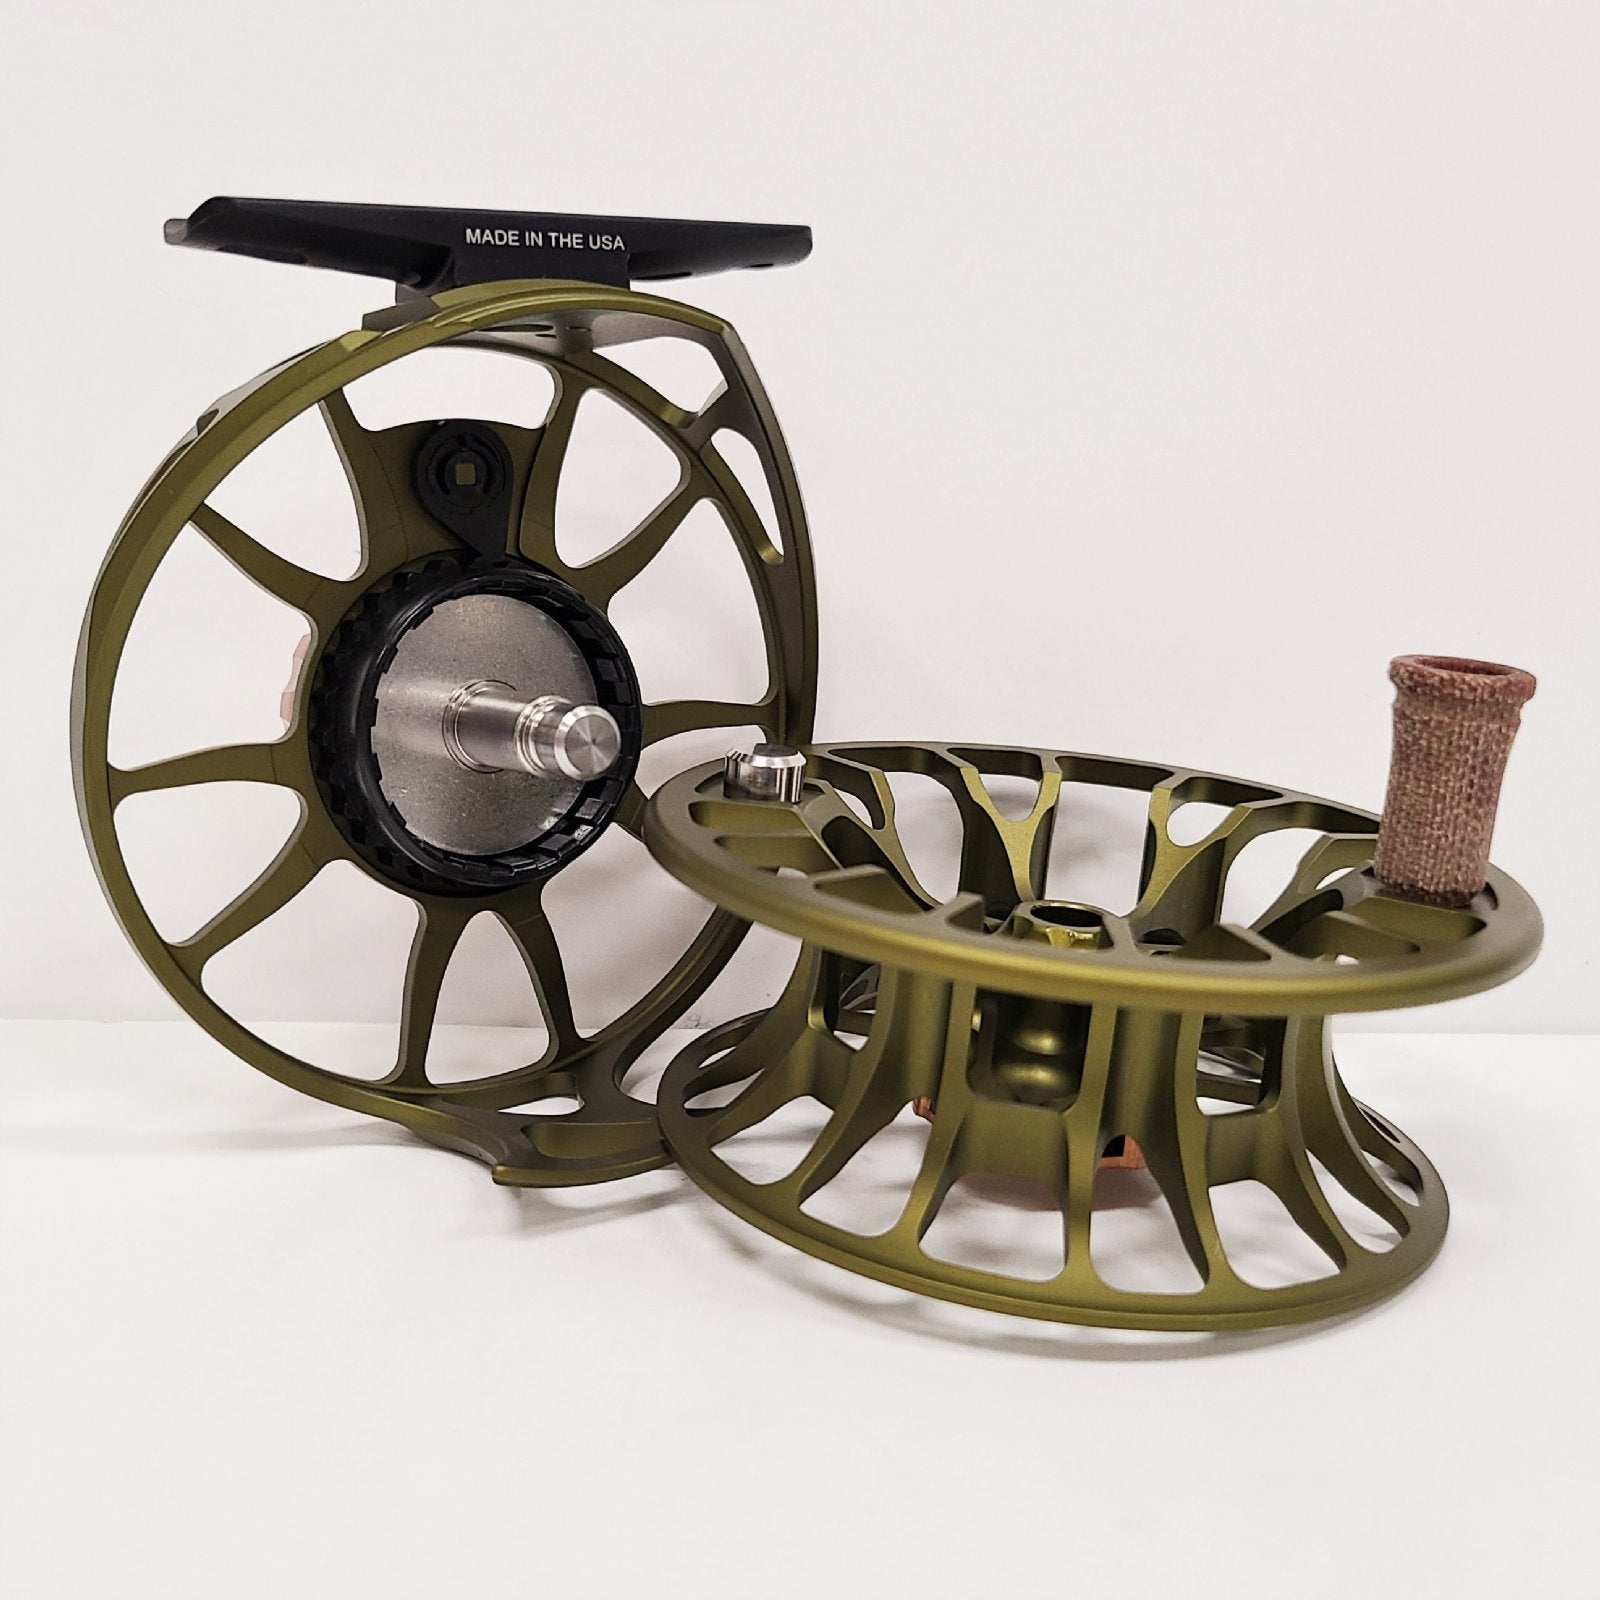 Ross Animas 5/6 Fly Reel - Olive -  - Mansfield Hunting & Fishing - Products to prepare for Corona Virus